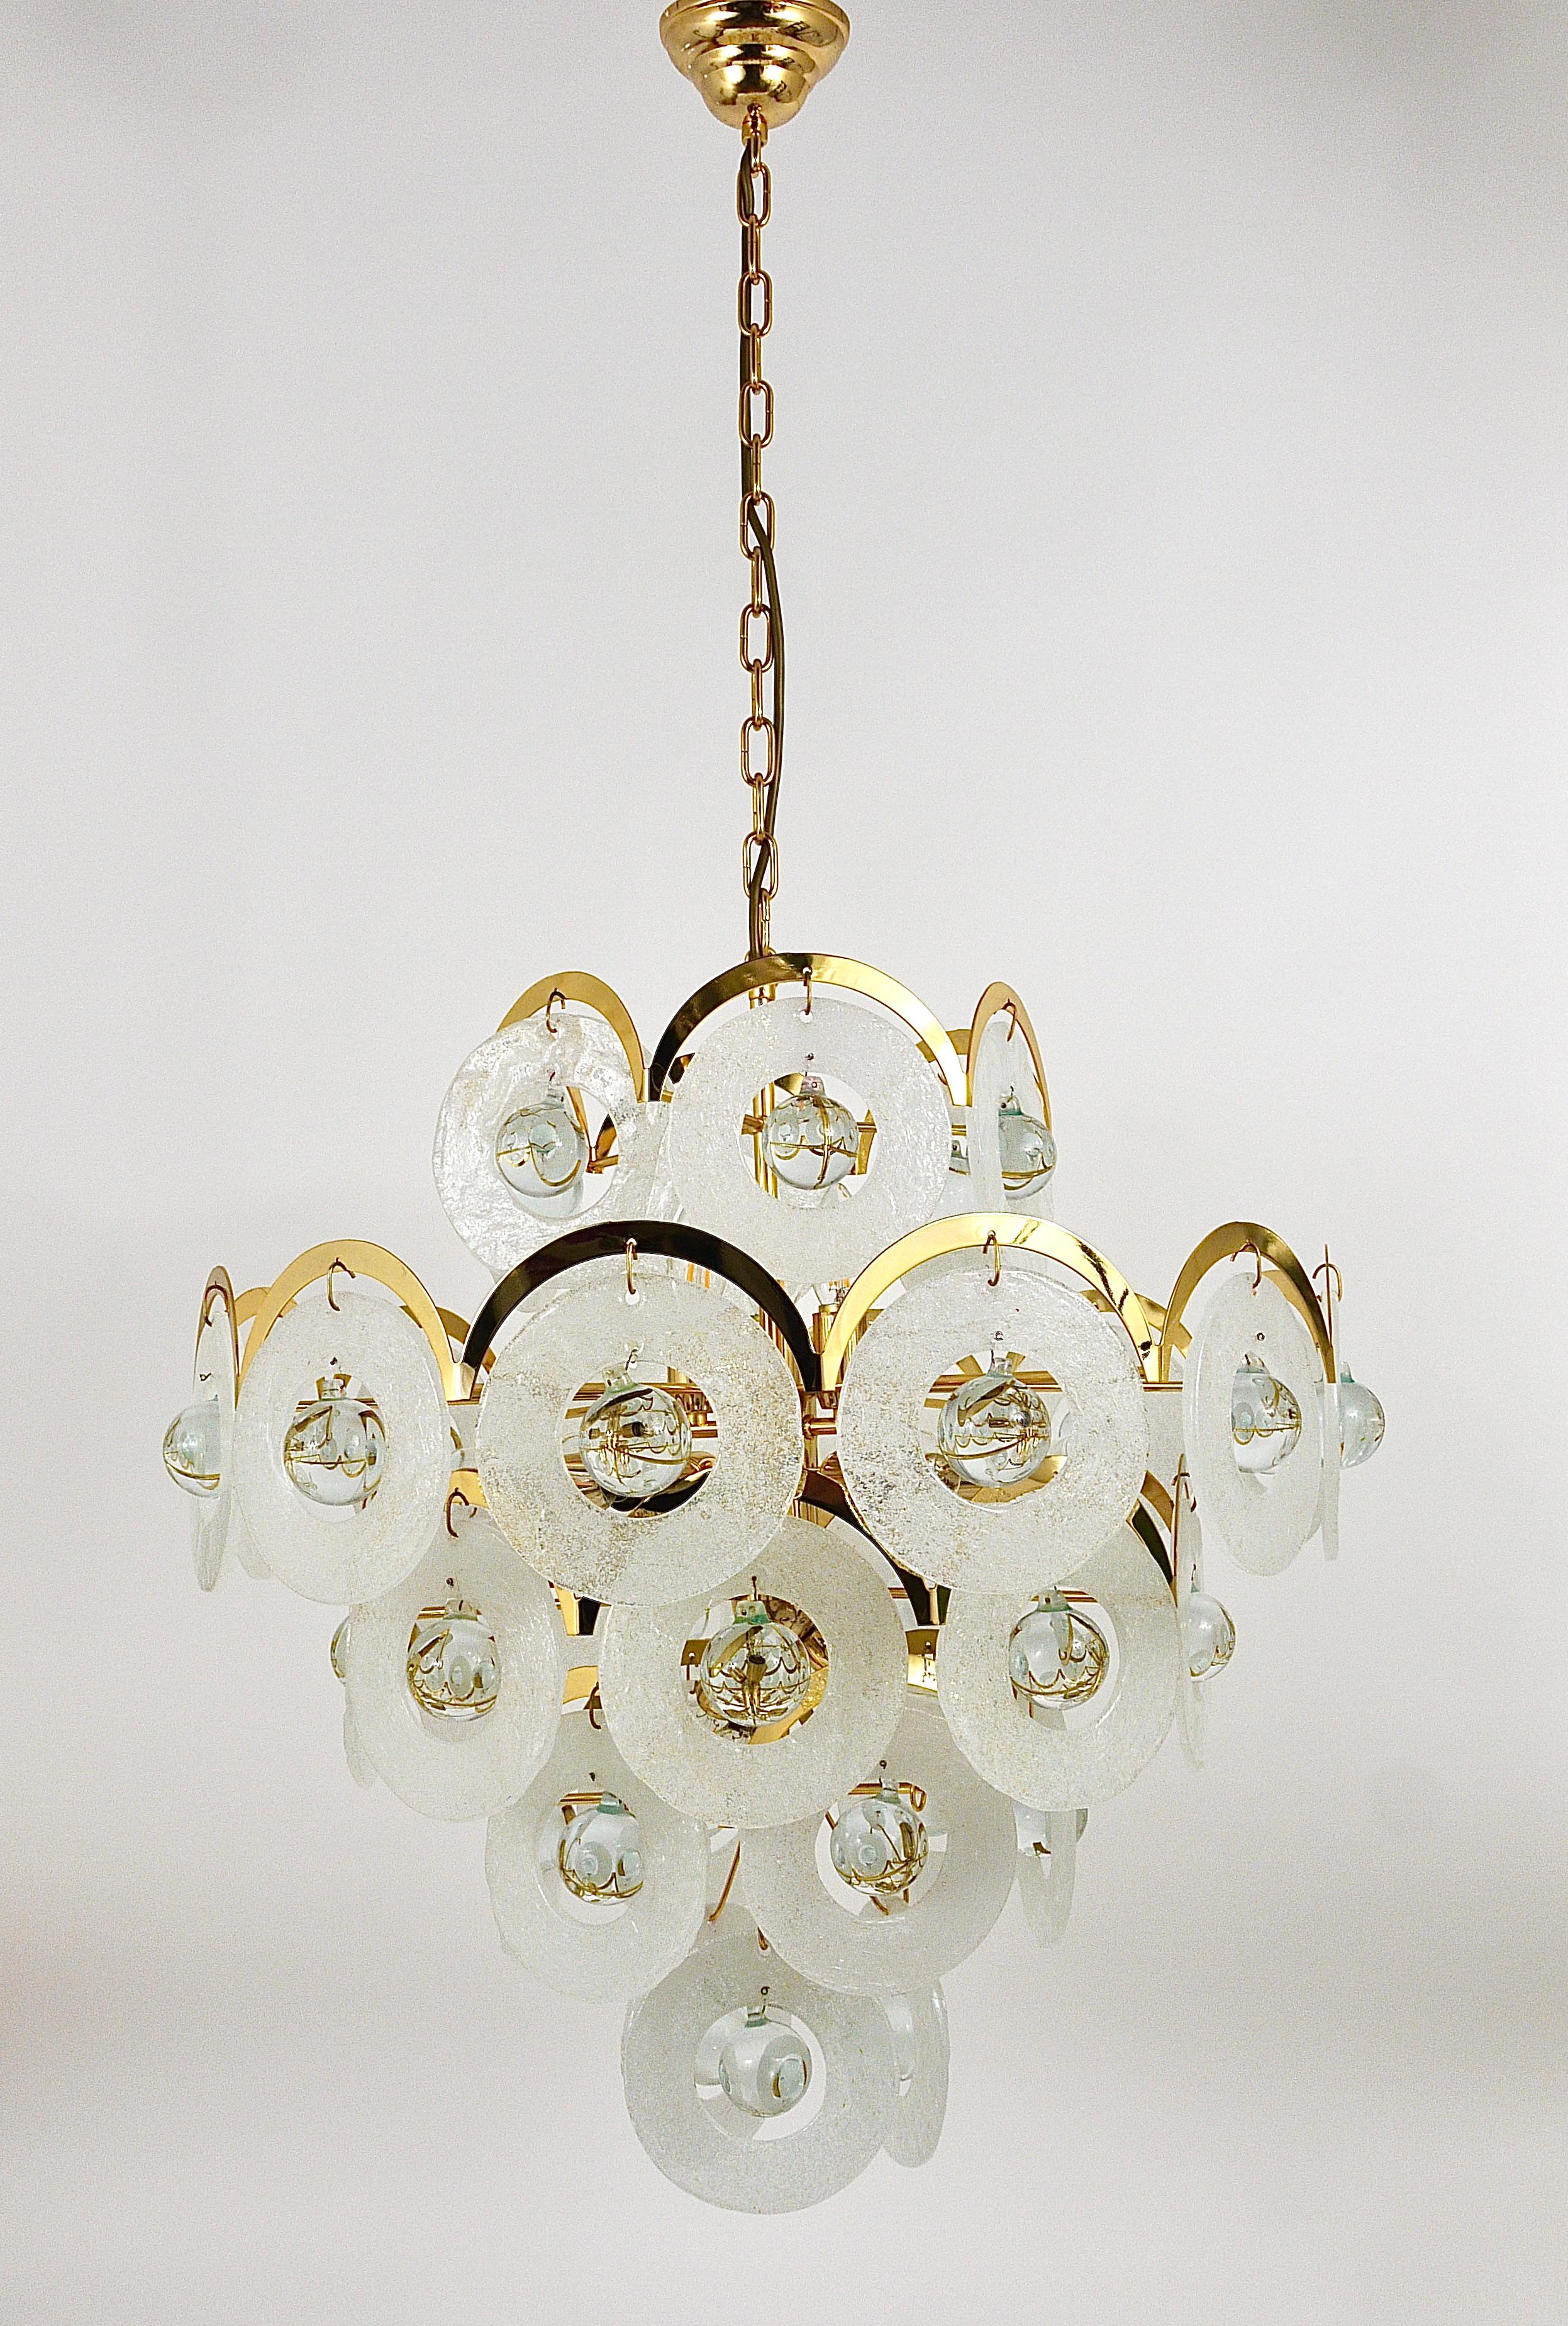 A beautiful and elegant huge round chandelier by Gino Vistosi from the 1970s. A gold-plated arched brass frame with five tiers of handmade ice glass / melting glass rings with clear glass balls in their center. Each disc has a diameter of 6 inches,